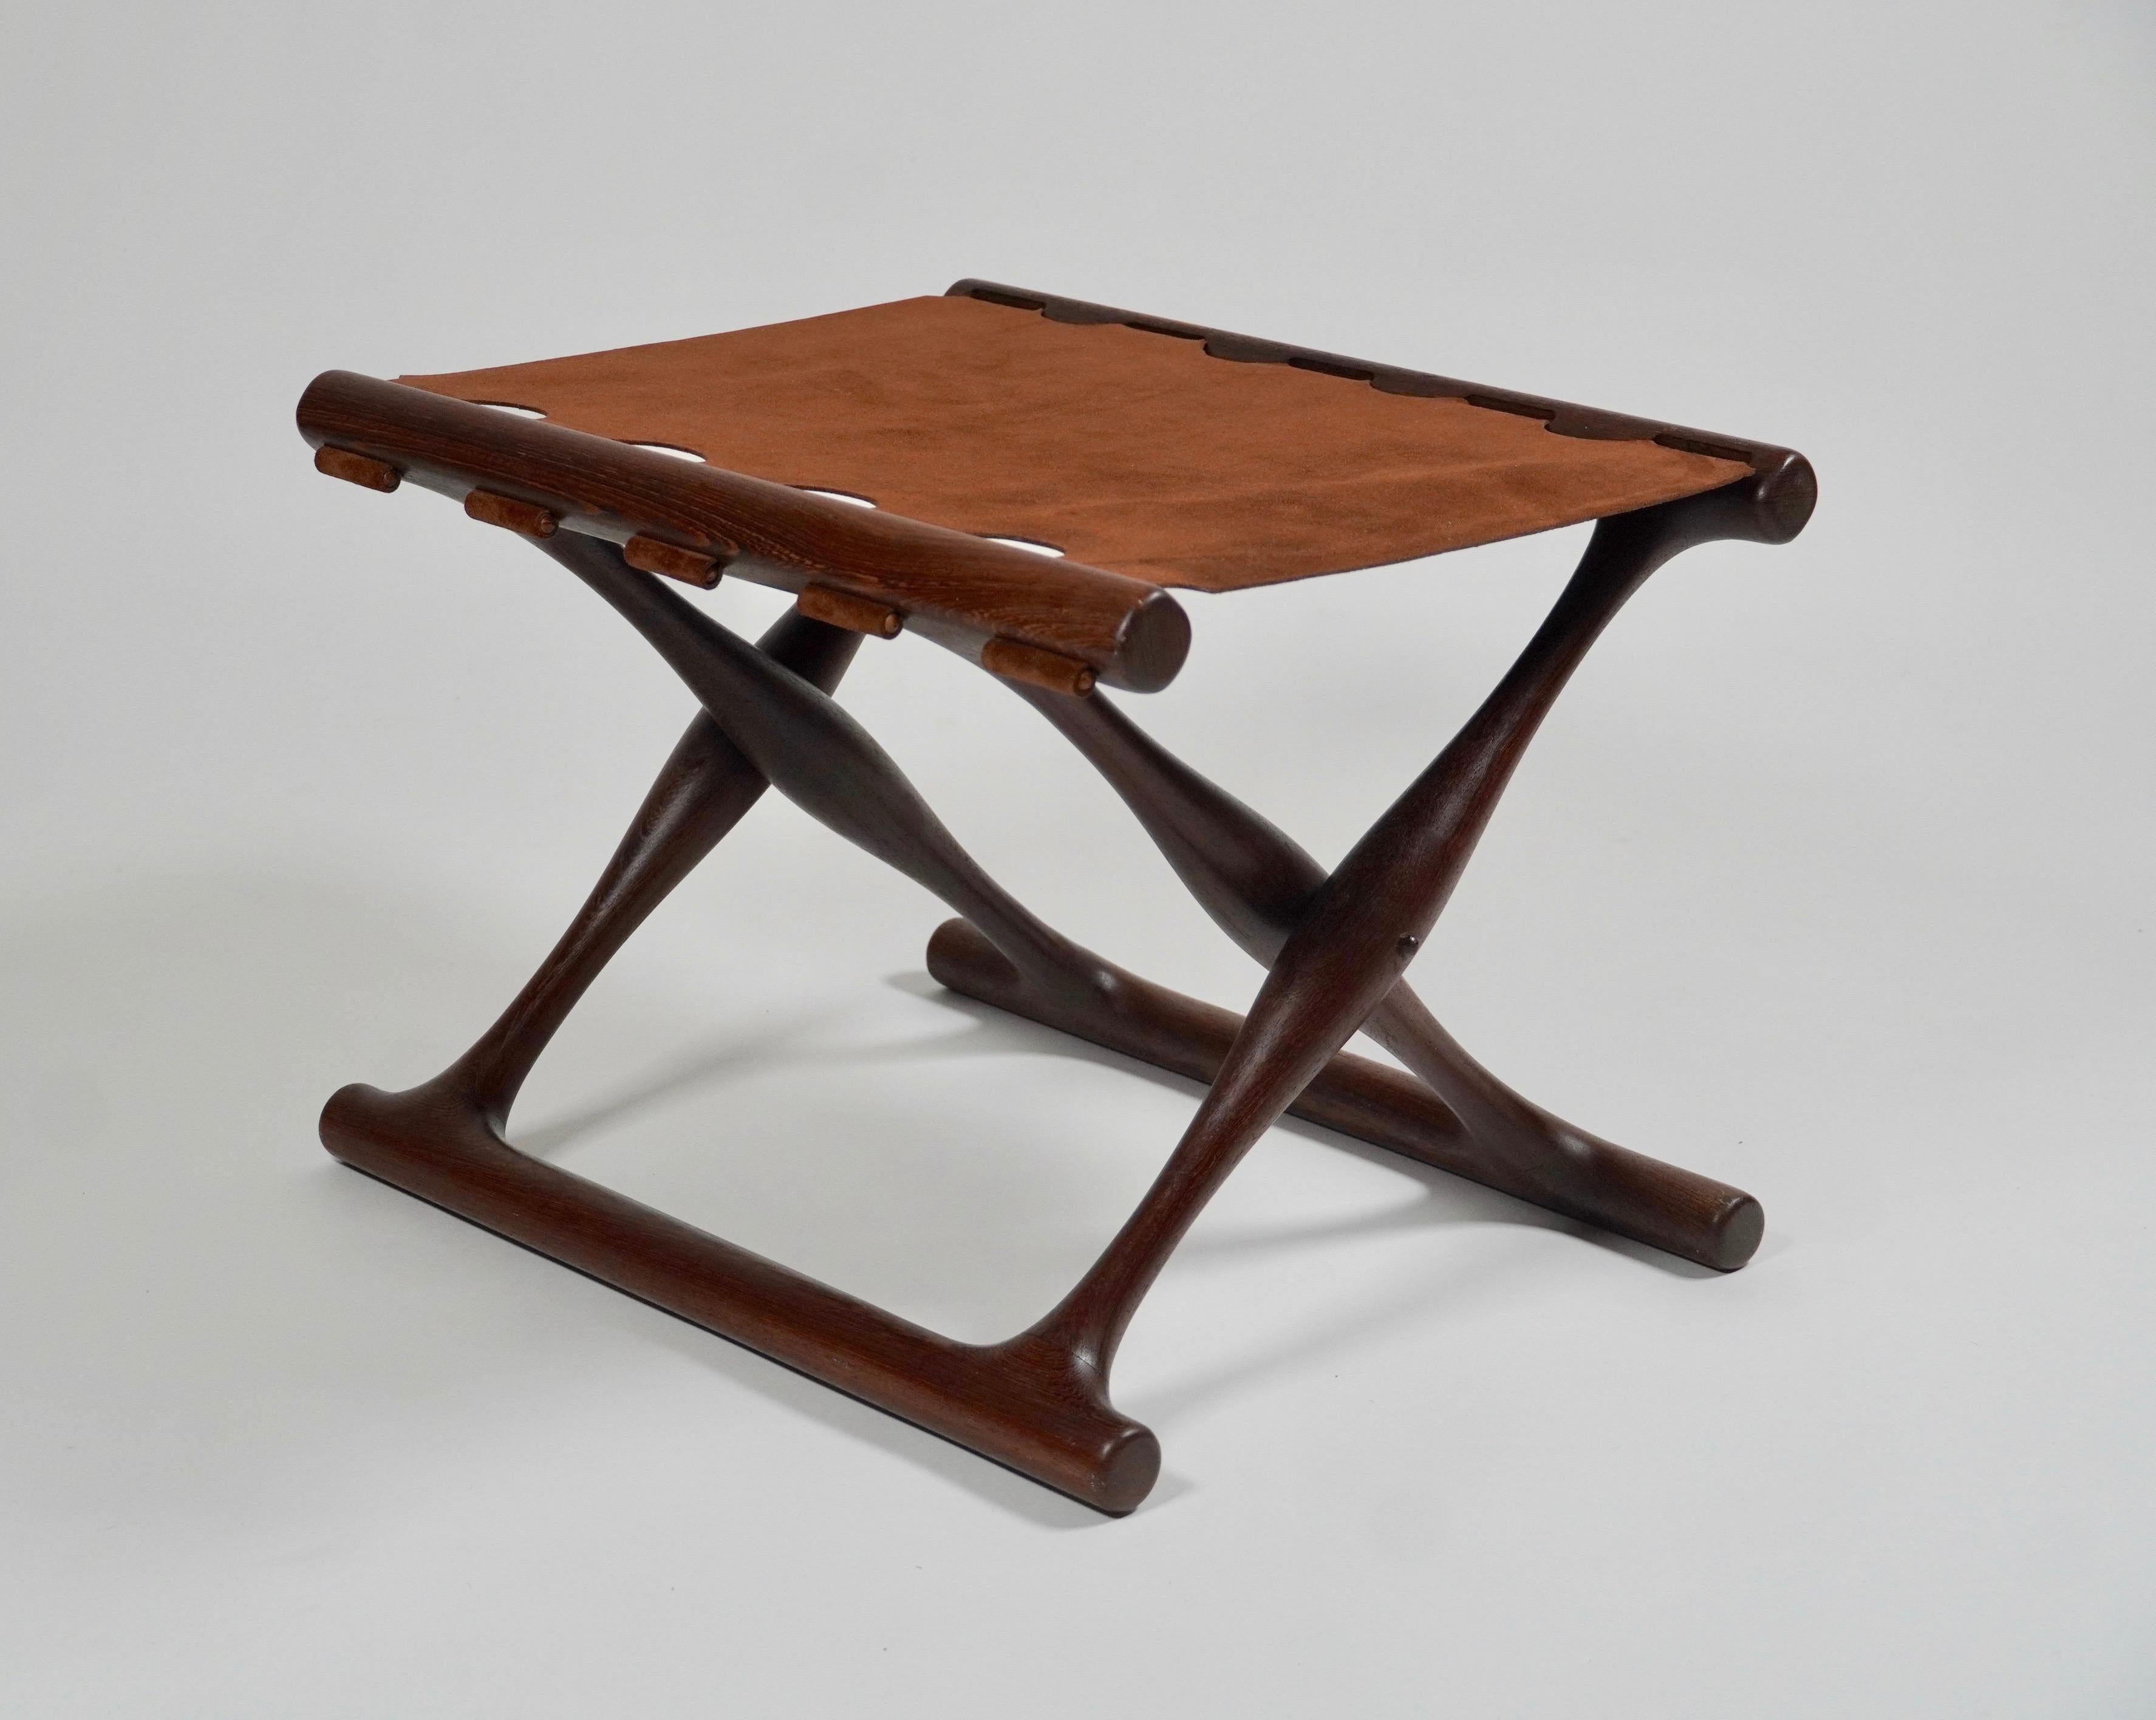 Scandinavian Modern Rare Woods African Wenge and Suede Poul Hundevad Folding Stool PH43 of Denmark